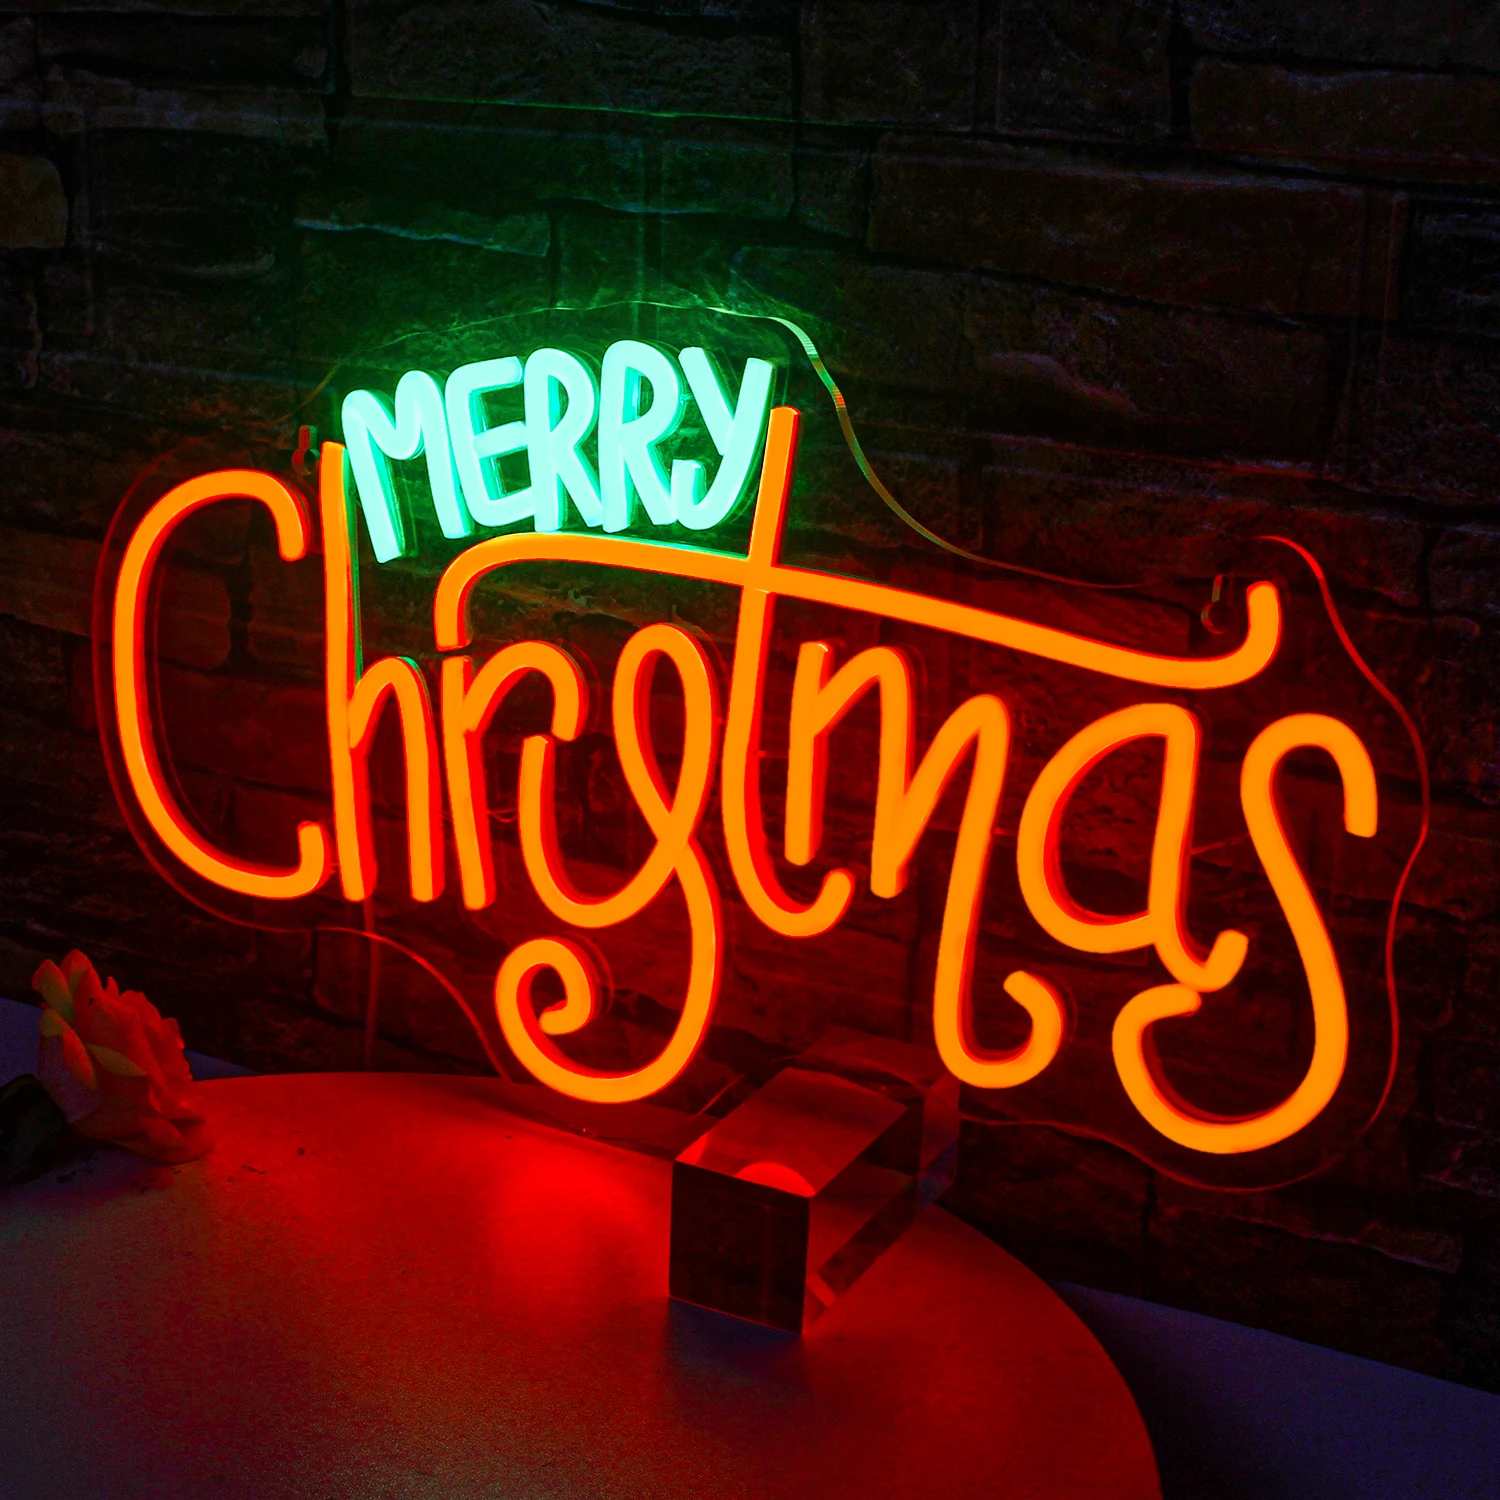 Merry Christmas Neon Sign Led Neon Light Wall Decor Usb Light Up Sign Bedroom Home Party Christmas Decorations Family Kids Gifts 2 count blank department sign xmas decorations aluminum alloy nativity ornaments plastic christmas